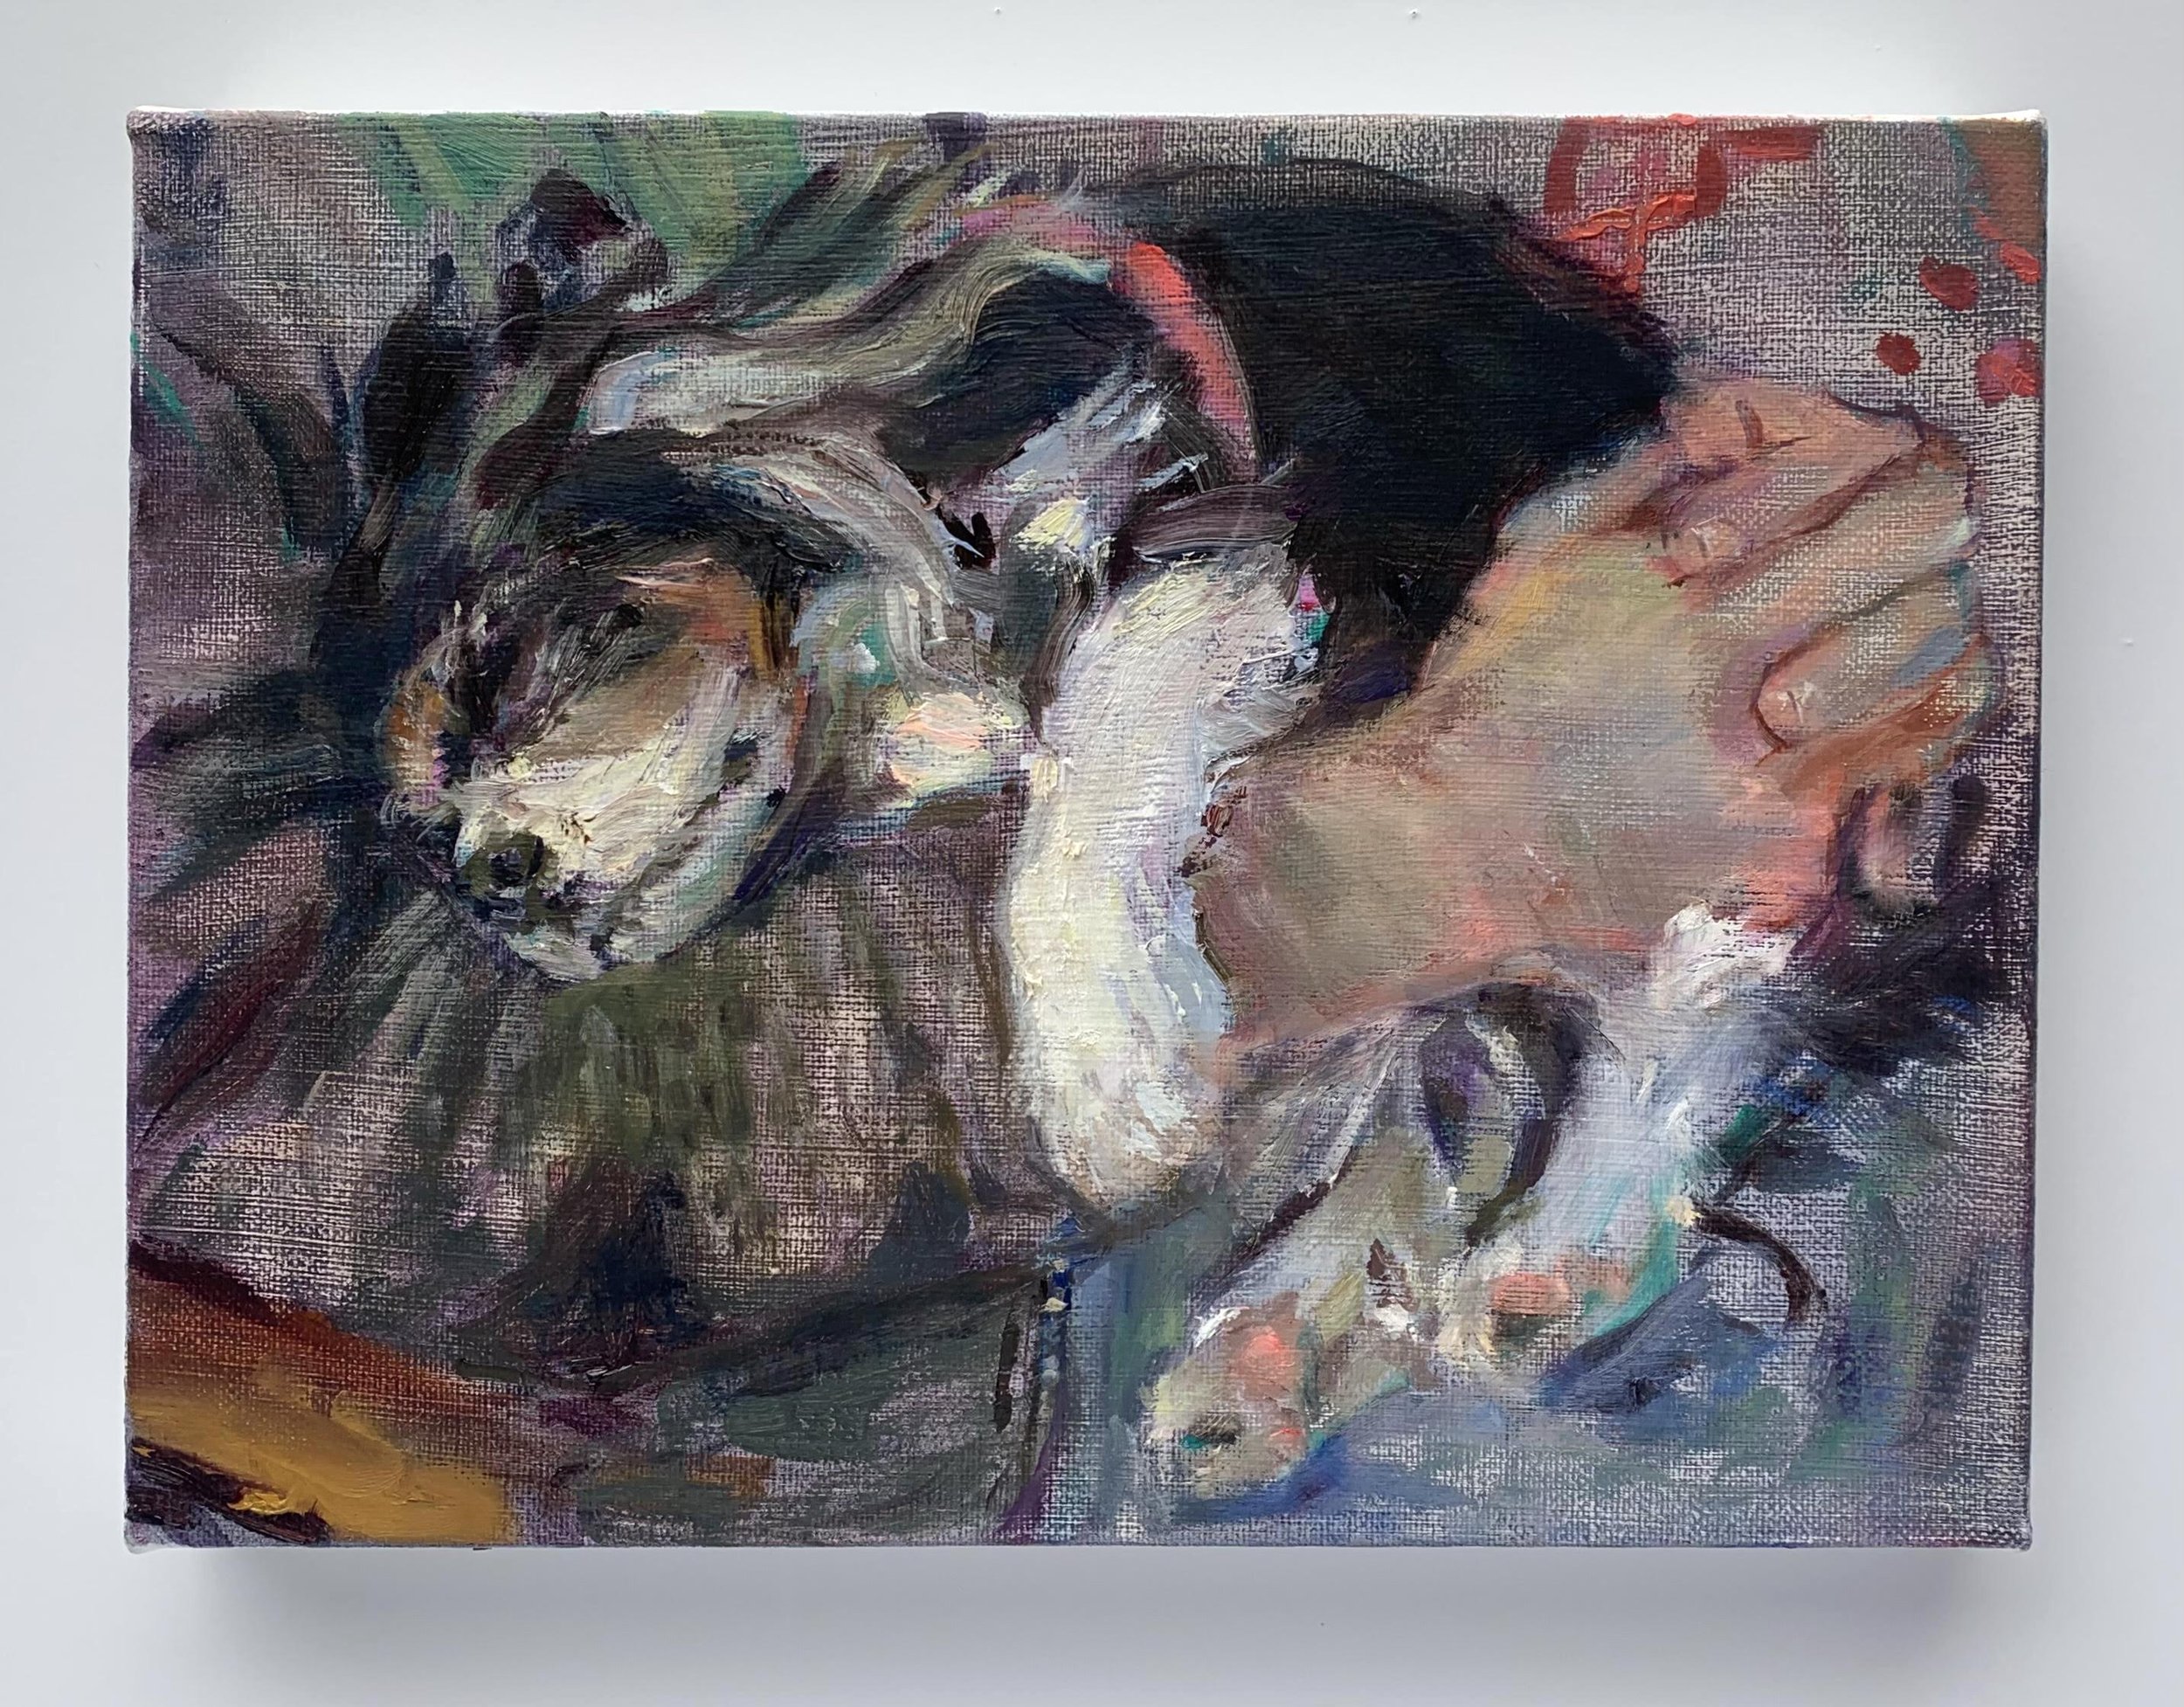  Hazel in your arms, 2021  Oil on linen  9 x 12 inches     